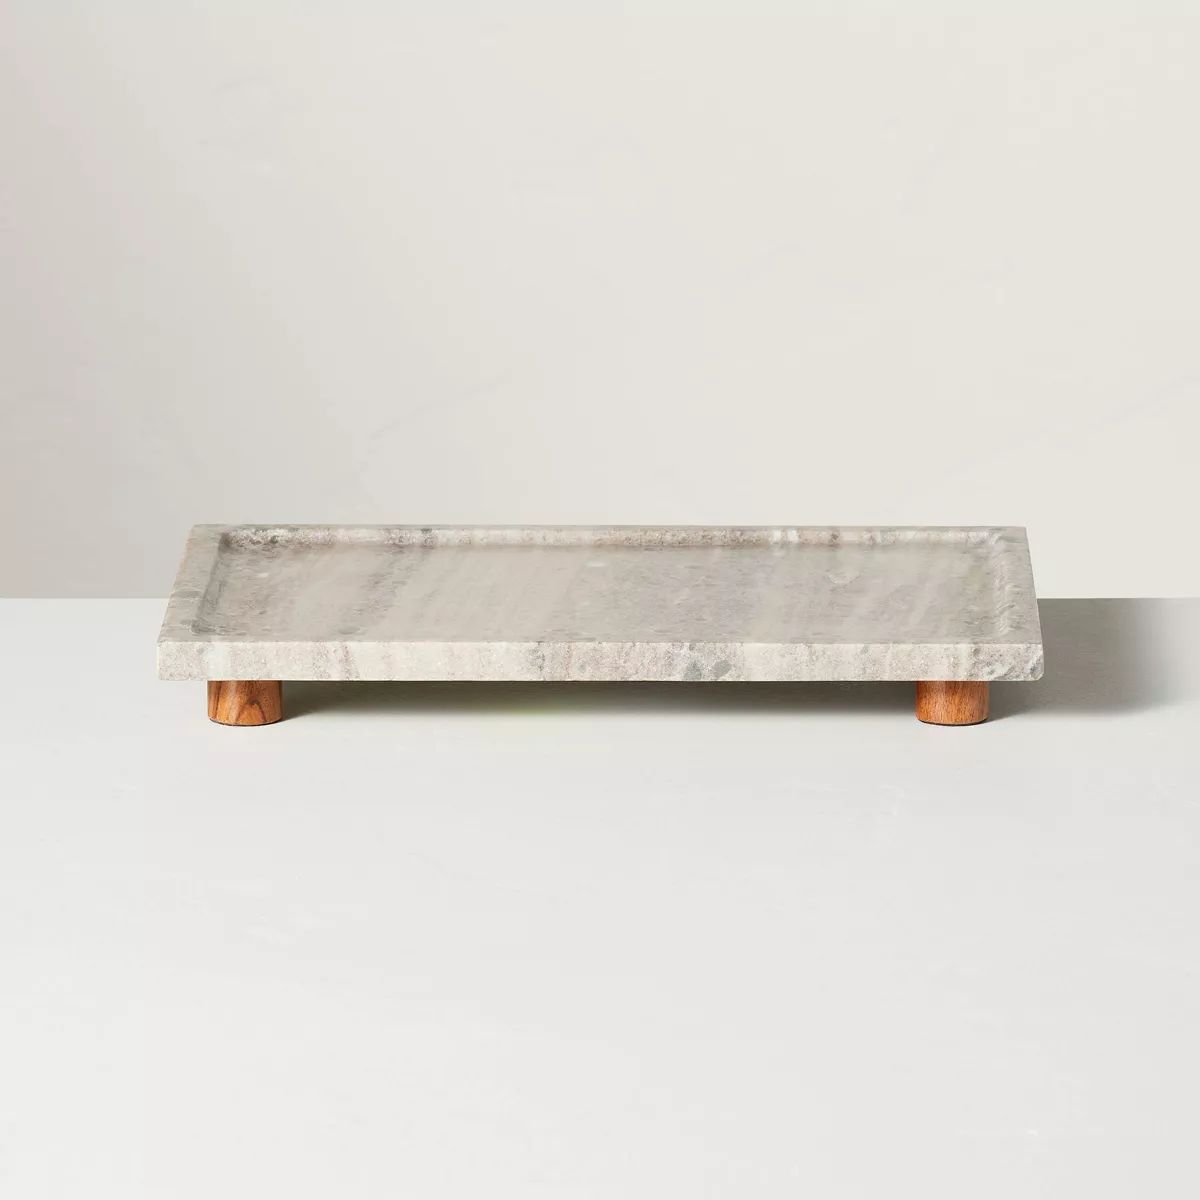 8"x12" Footed Marble Countertop Tray Warm Beige - Hearth & Hand™ with Magnolia | Target